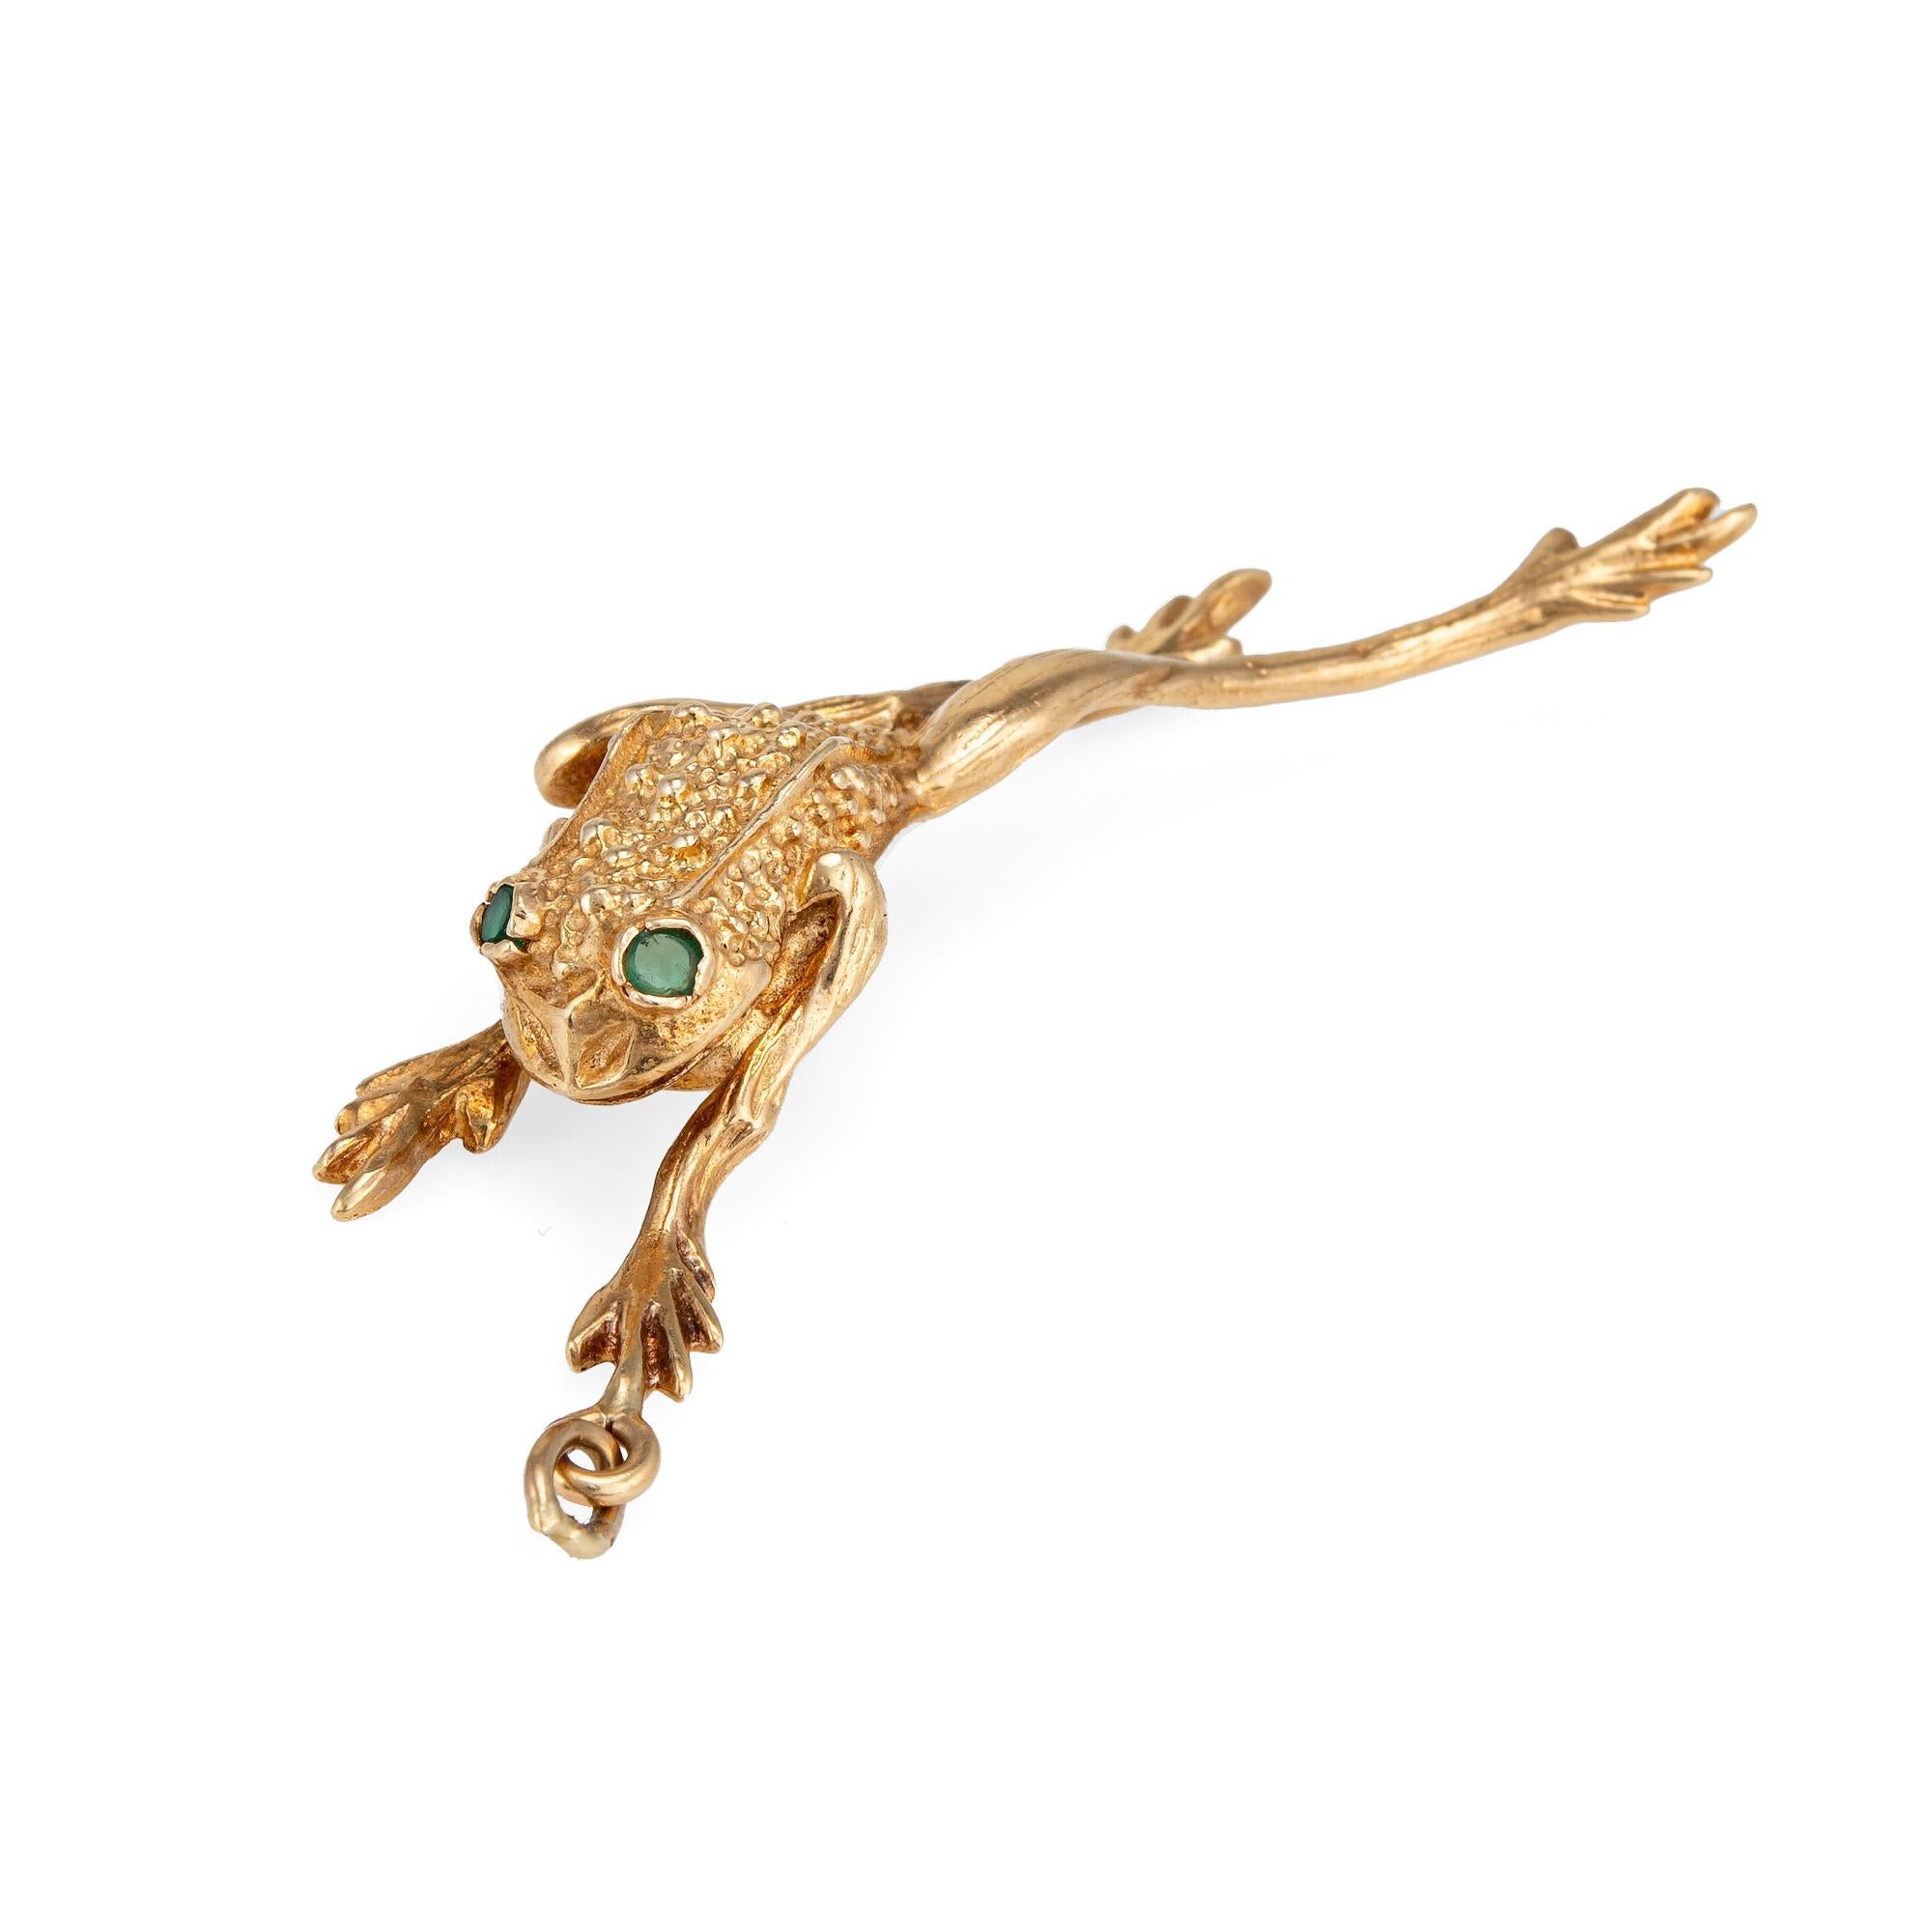 Finely detailed vintage frog pendant crafted in 14k yellow gold (circa 1960s to 1970s).  

Two estimated 0.02 carat emeralds are set into the eyes (0.04 carats total estimated weight). 

The charming & whimsical frog is crafted in a leaping position